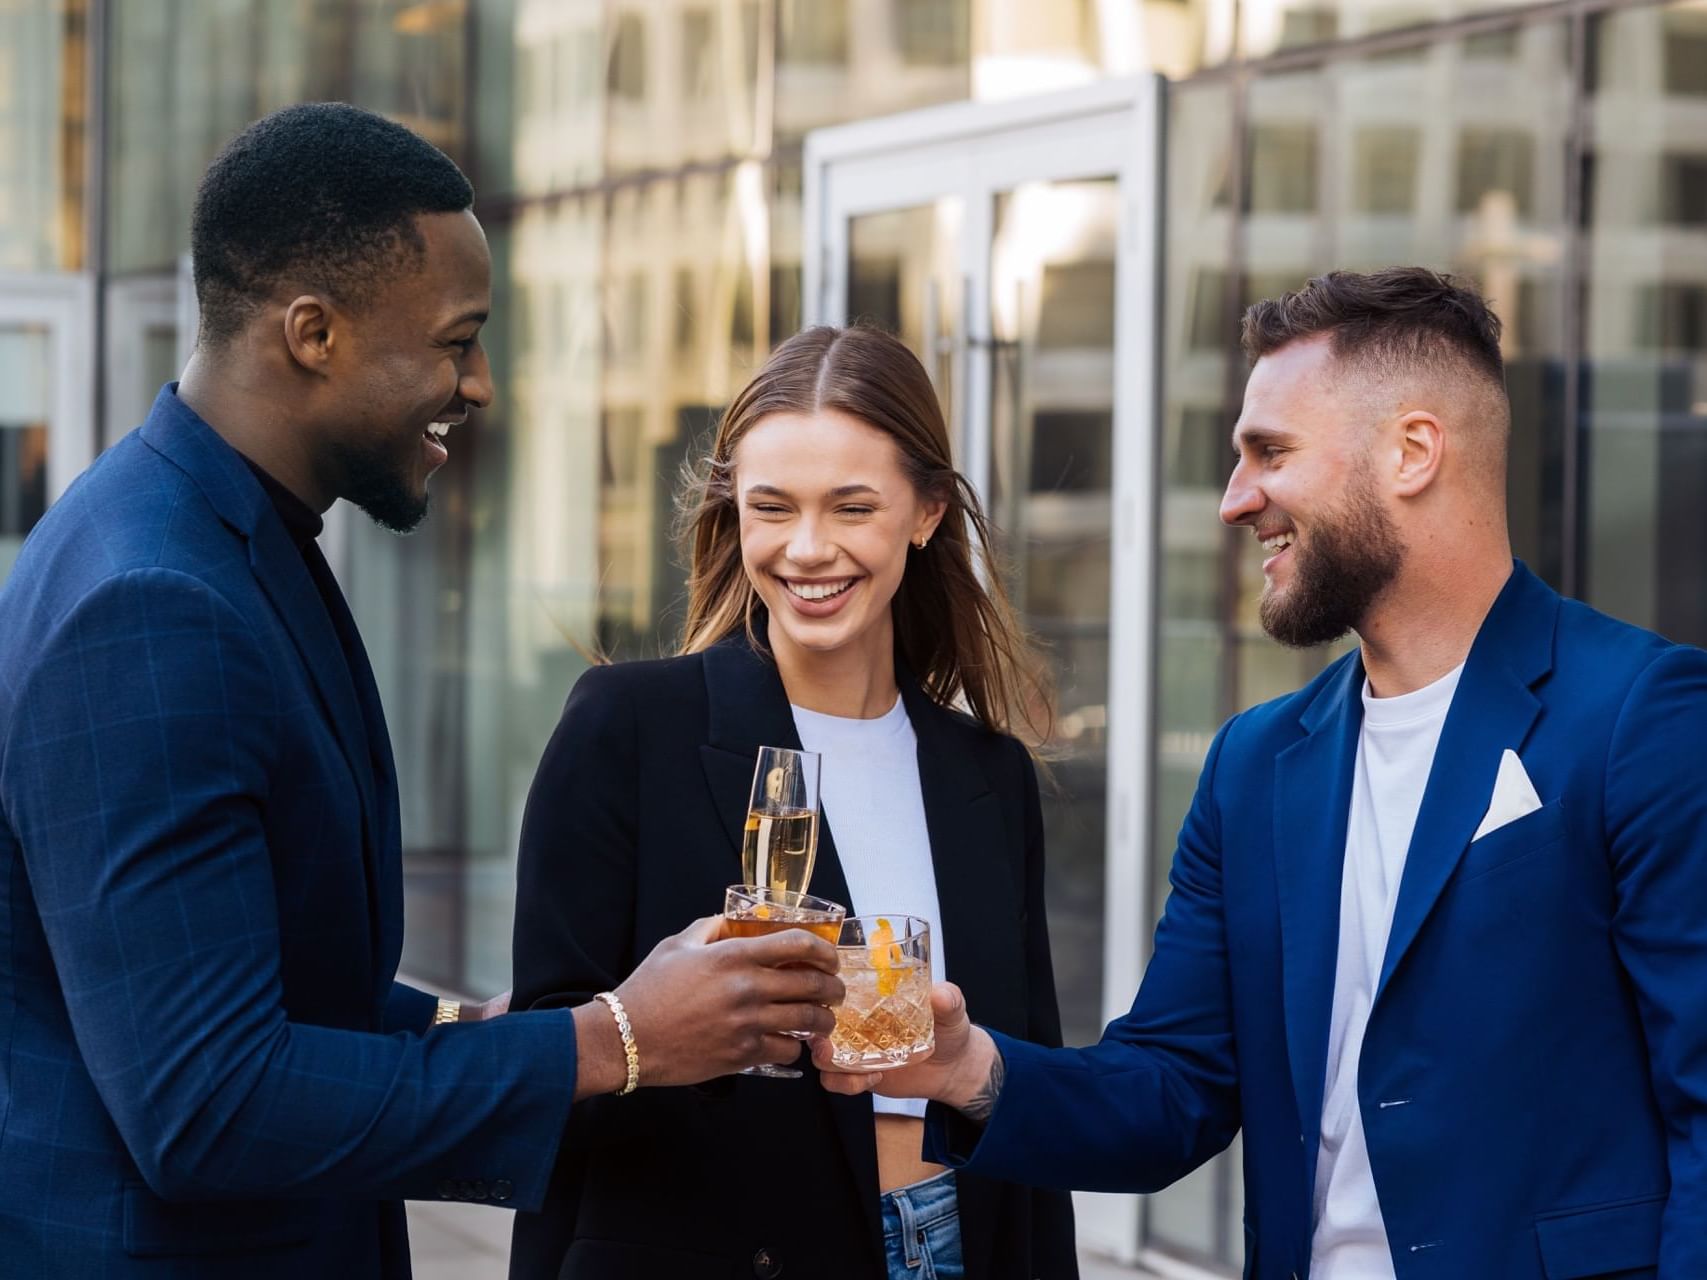 Three young corporate people enjoying drinks on a terrace